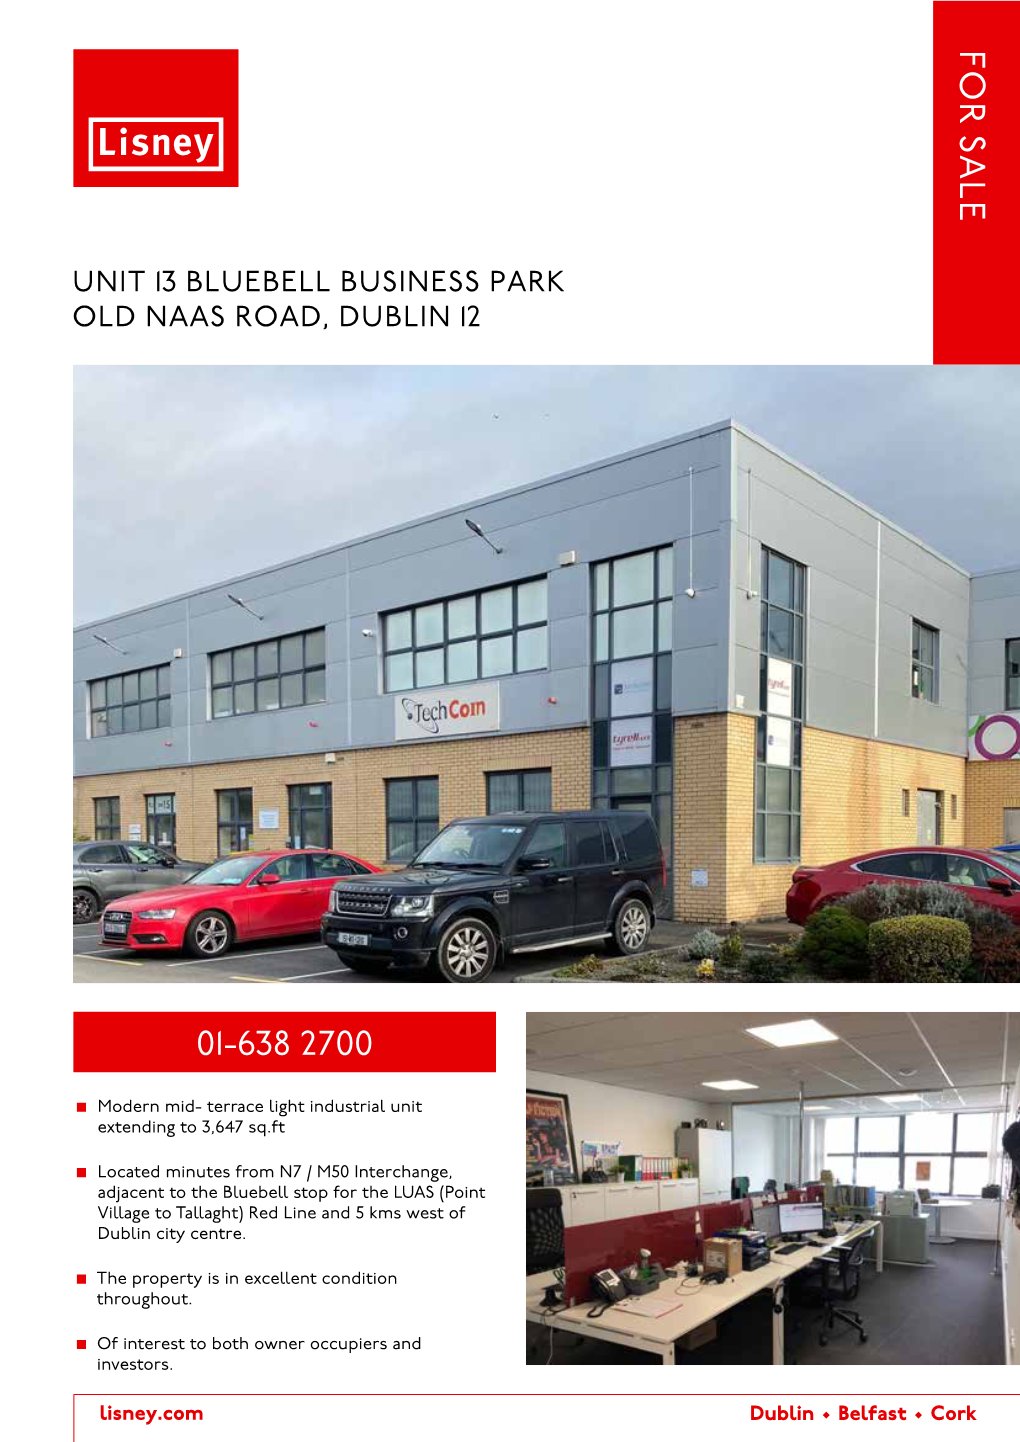 Unit 13 Bluebell Business Park Old Naas Road, Dublin 12